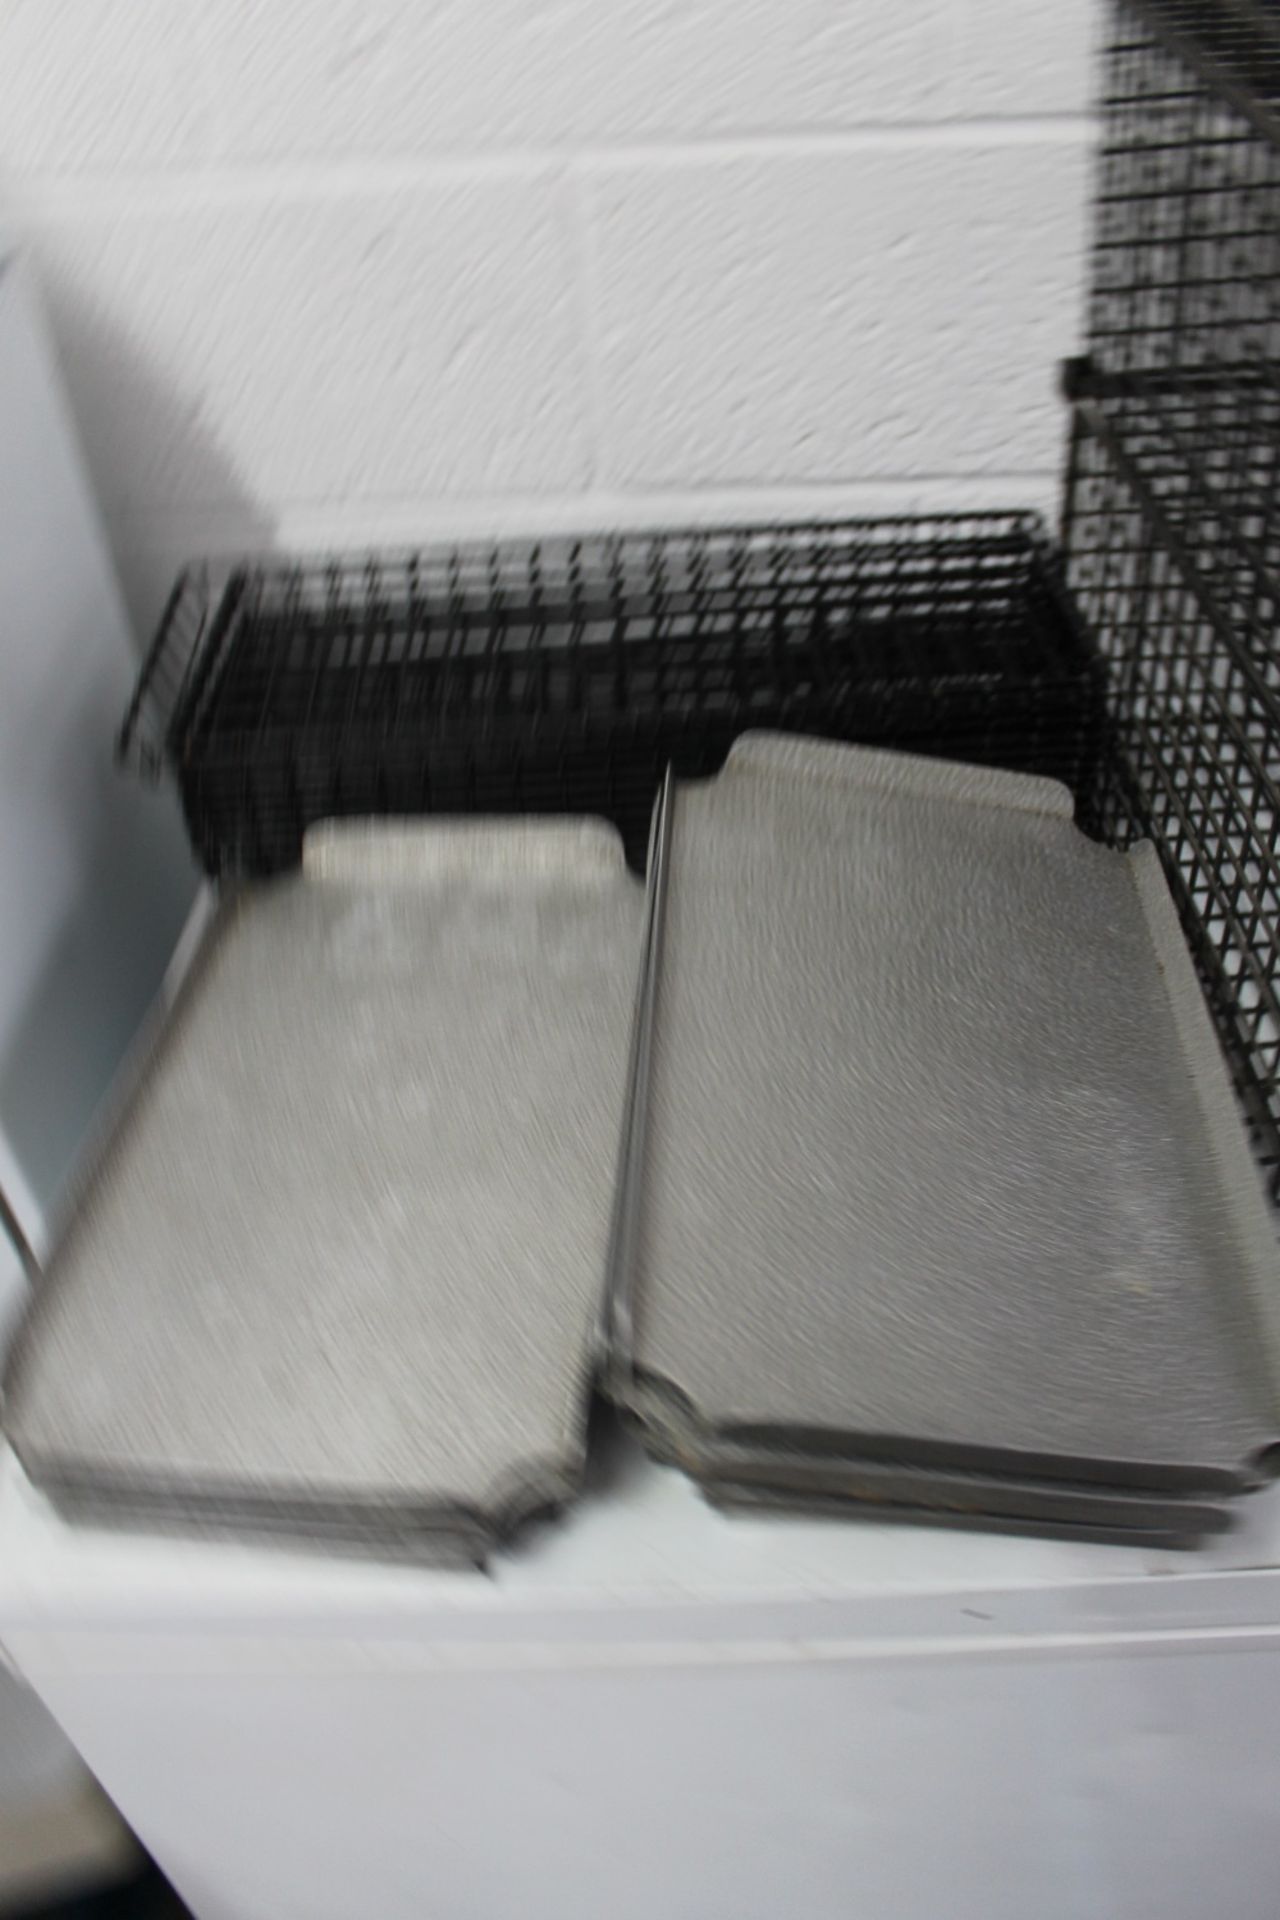 Quantity Bakers Counter Display Trays & Baskets - Image 3 of 6